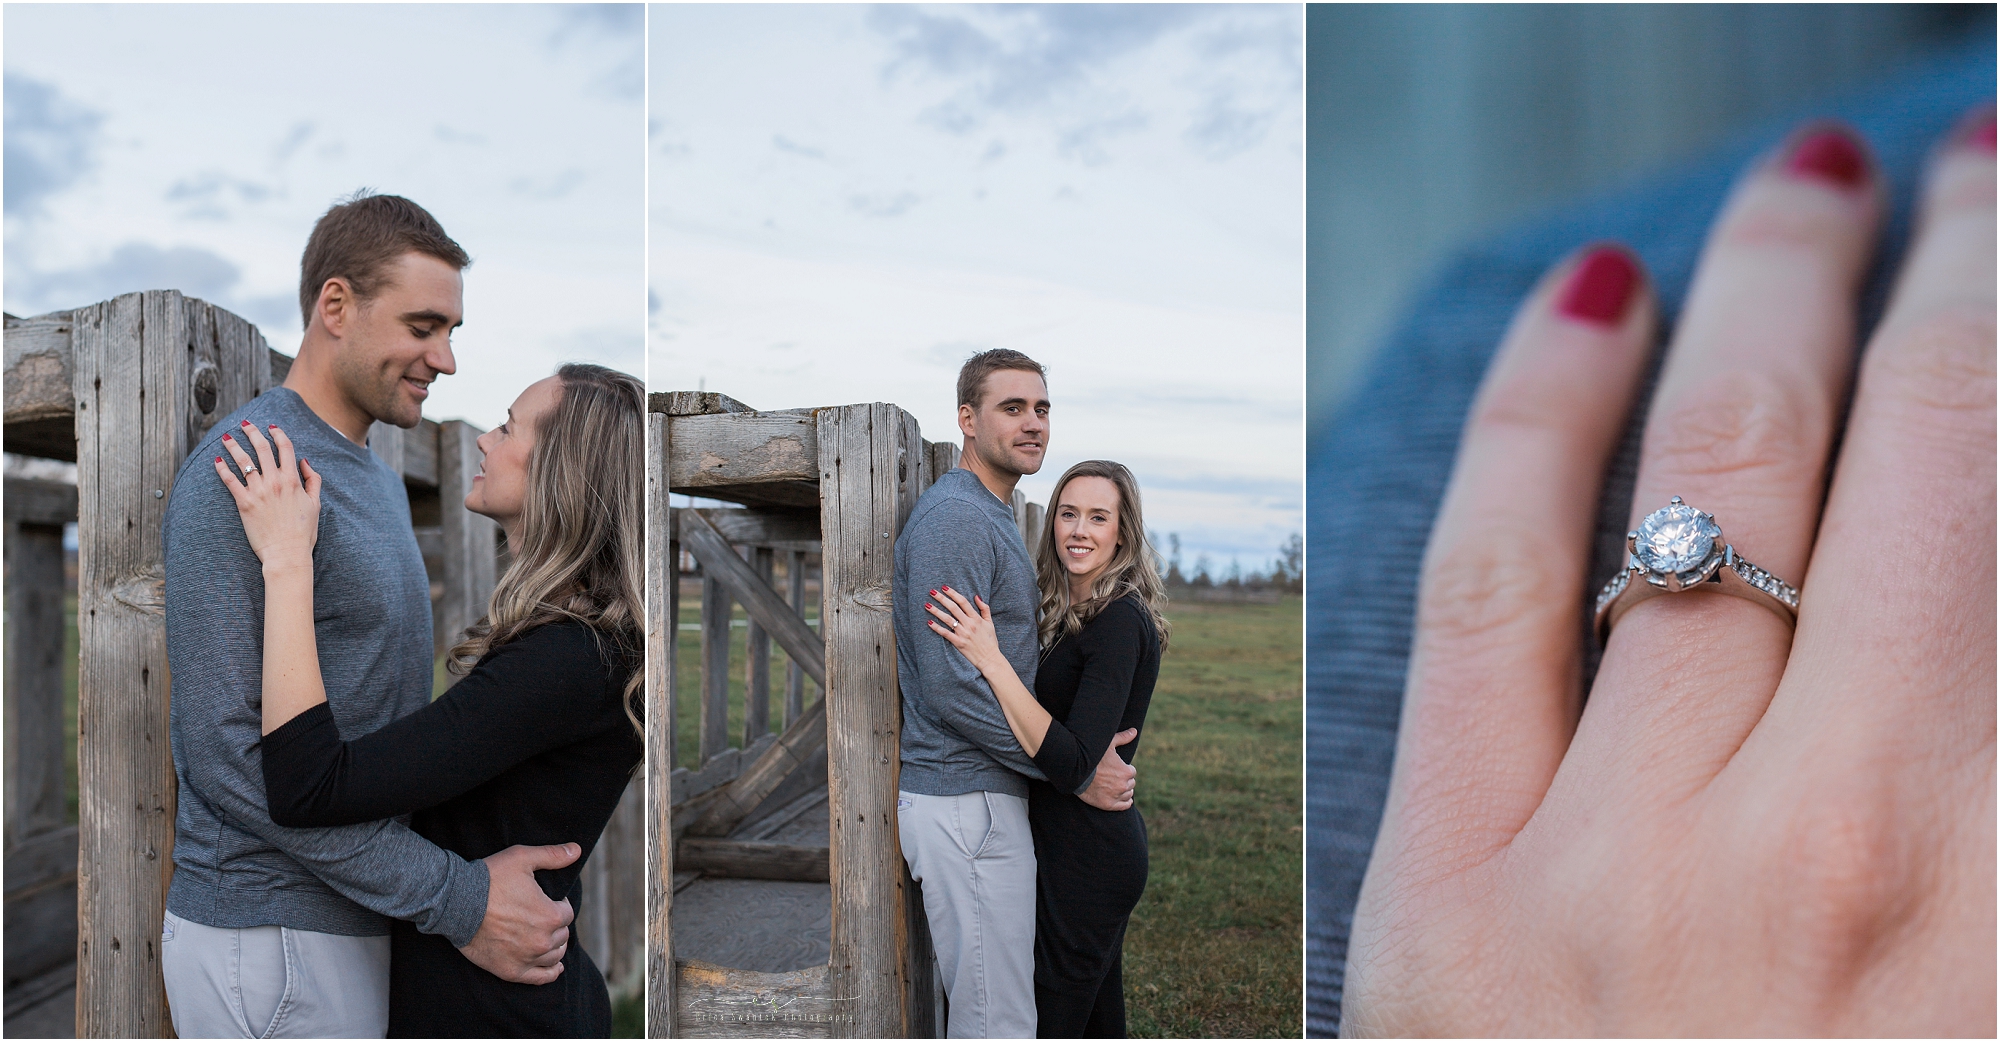 A beautiful engagement ring photo by Bend, Oregon outdoor wedding photographer Erica Swantek Photography. 